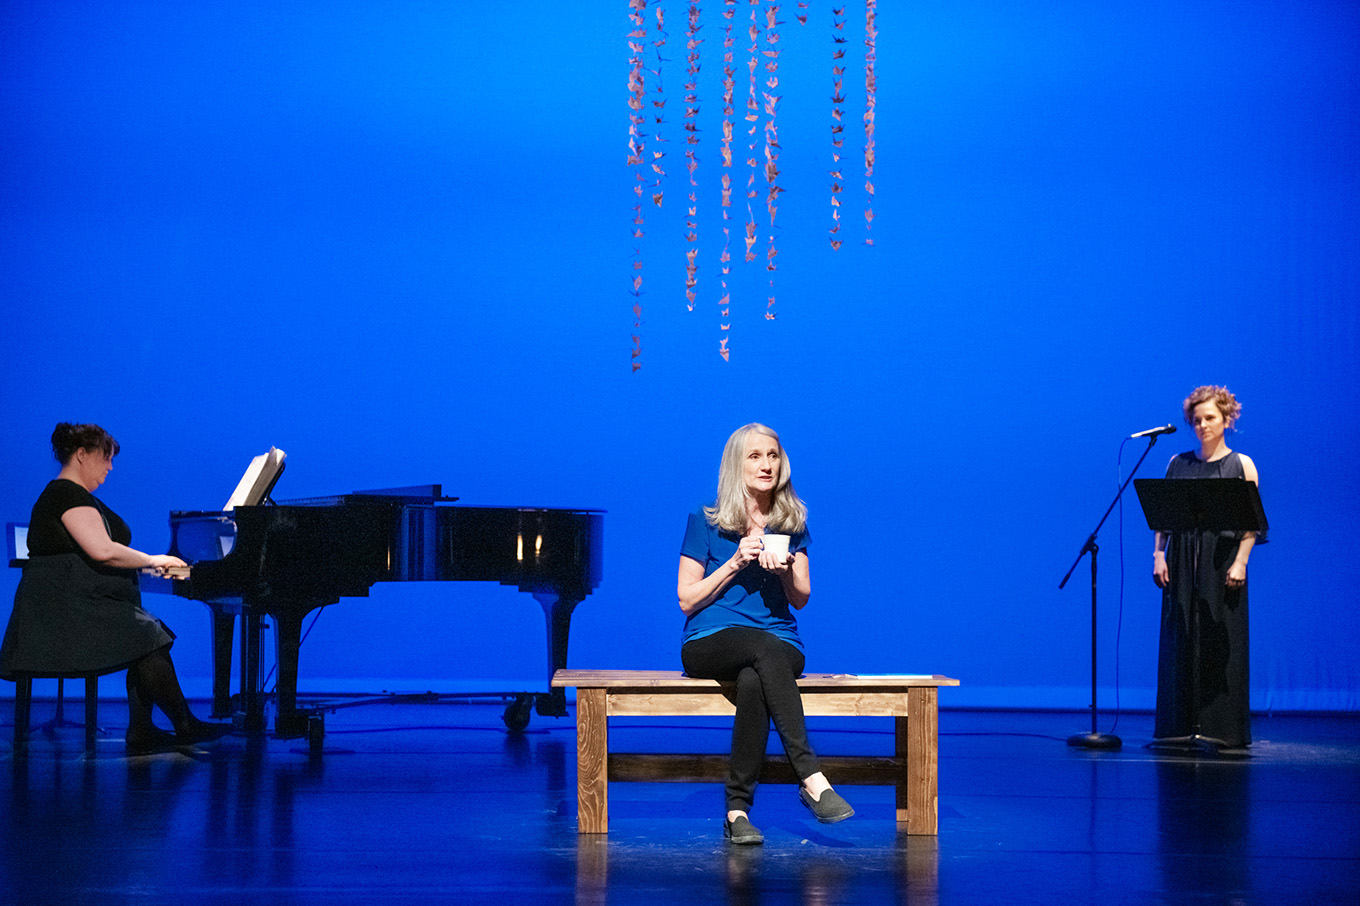 Nelson performer brings life-changing event to the stage